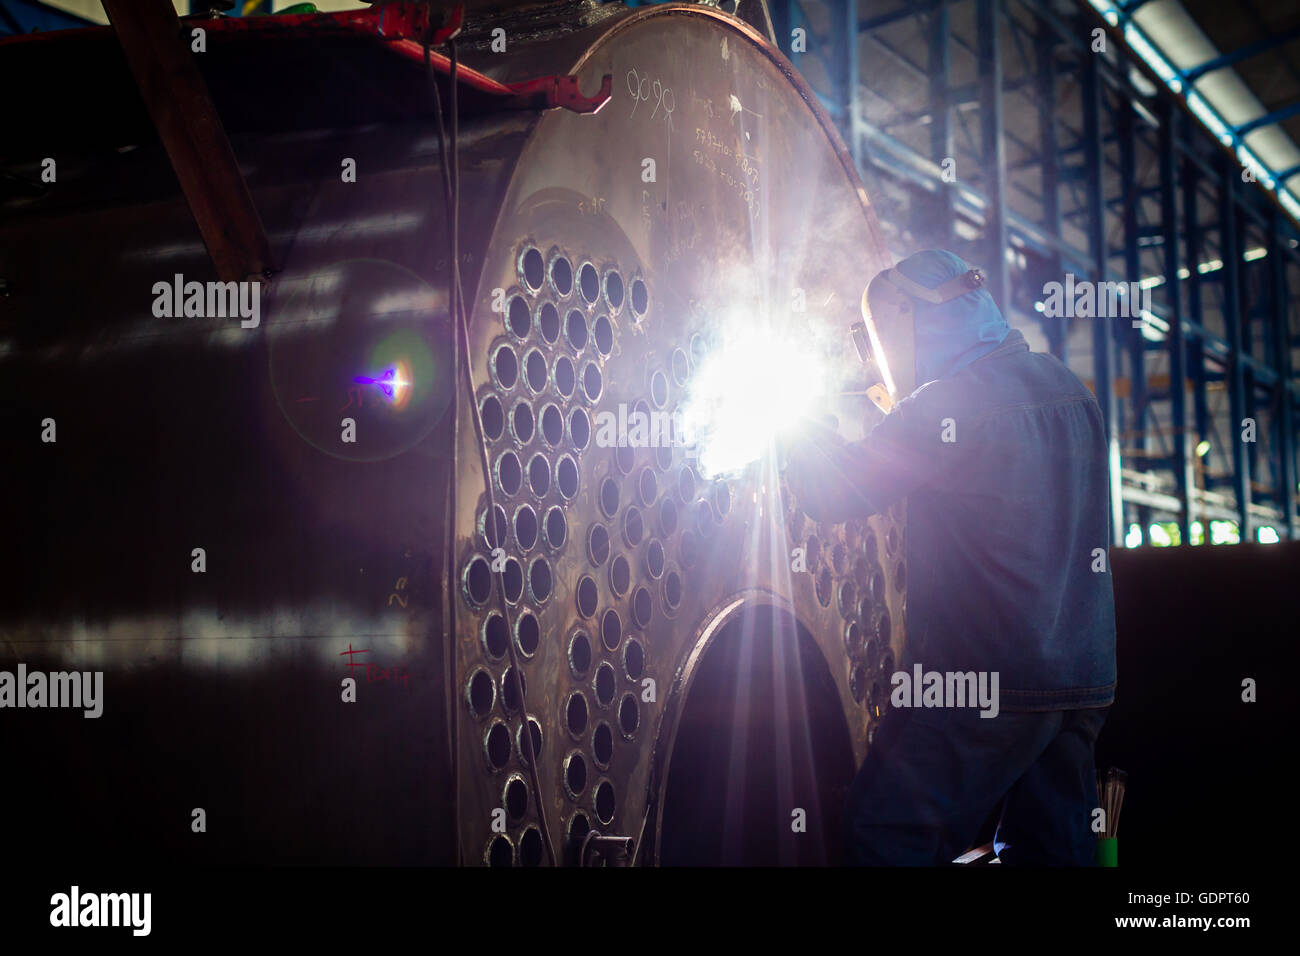 Welder working in an industrial setting manufacturing steel equipment Stock Photo